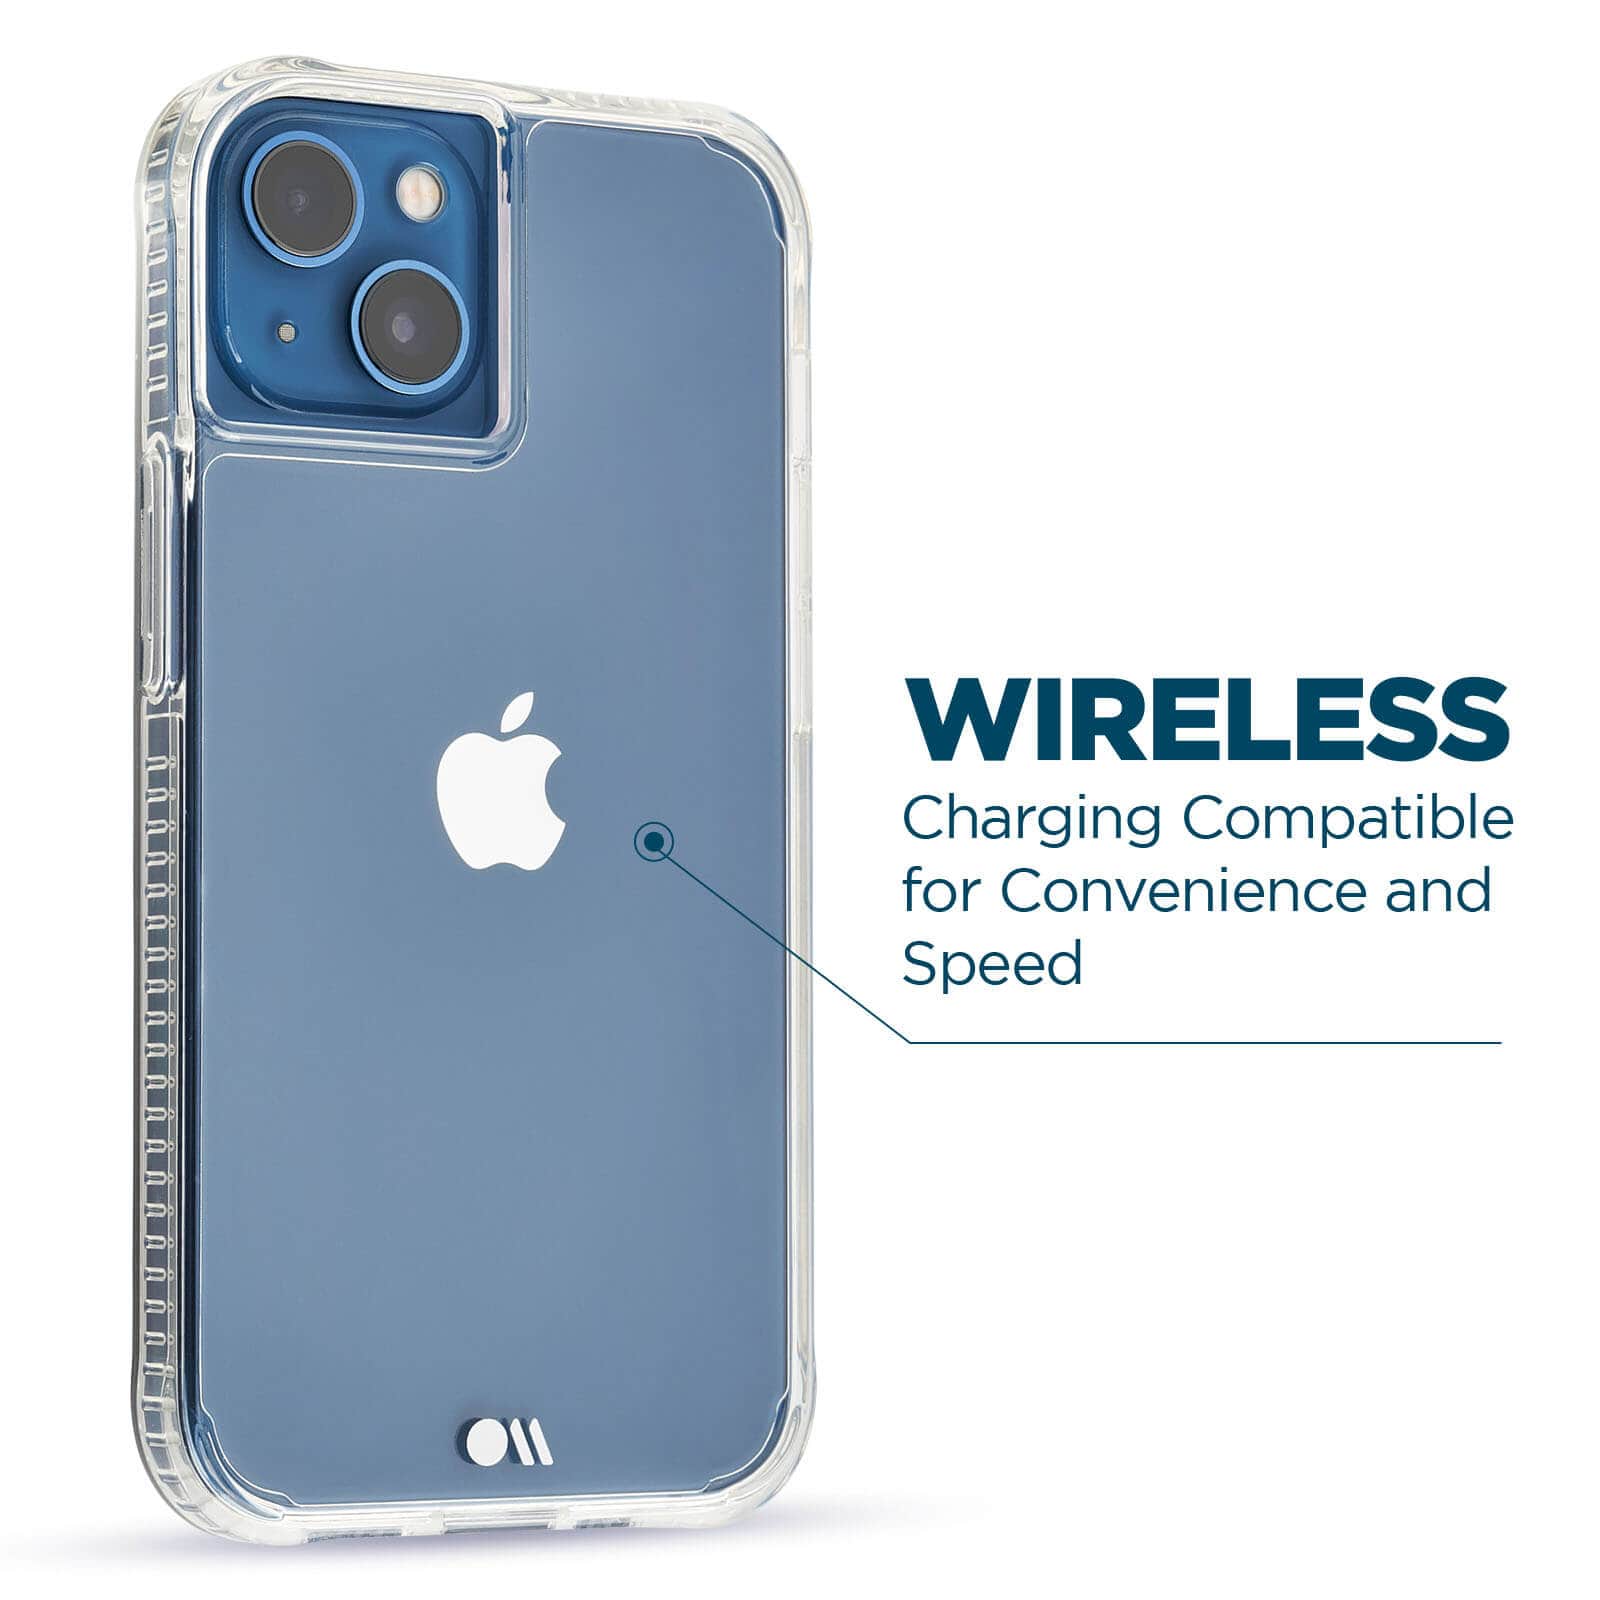 Wireless charging compatible for convenience and speed. color::Clear